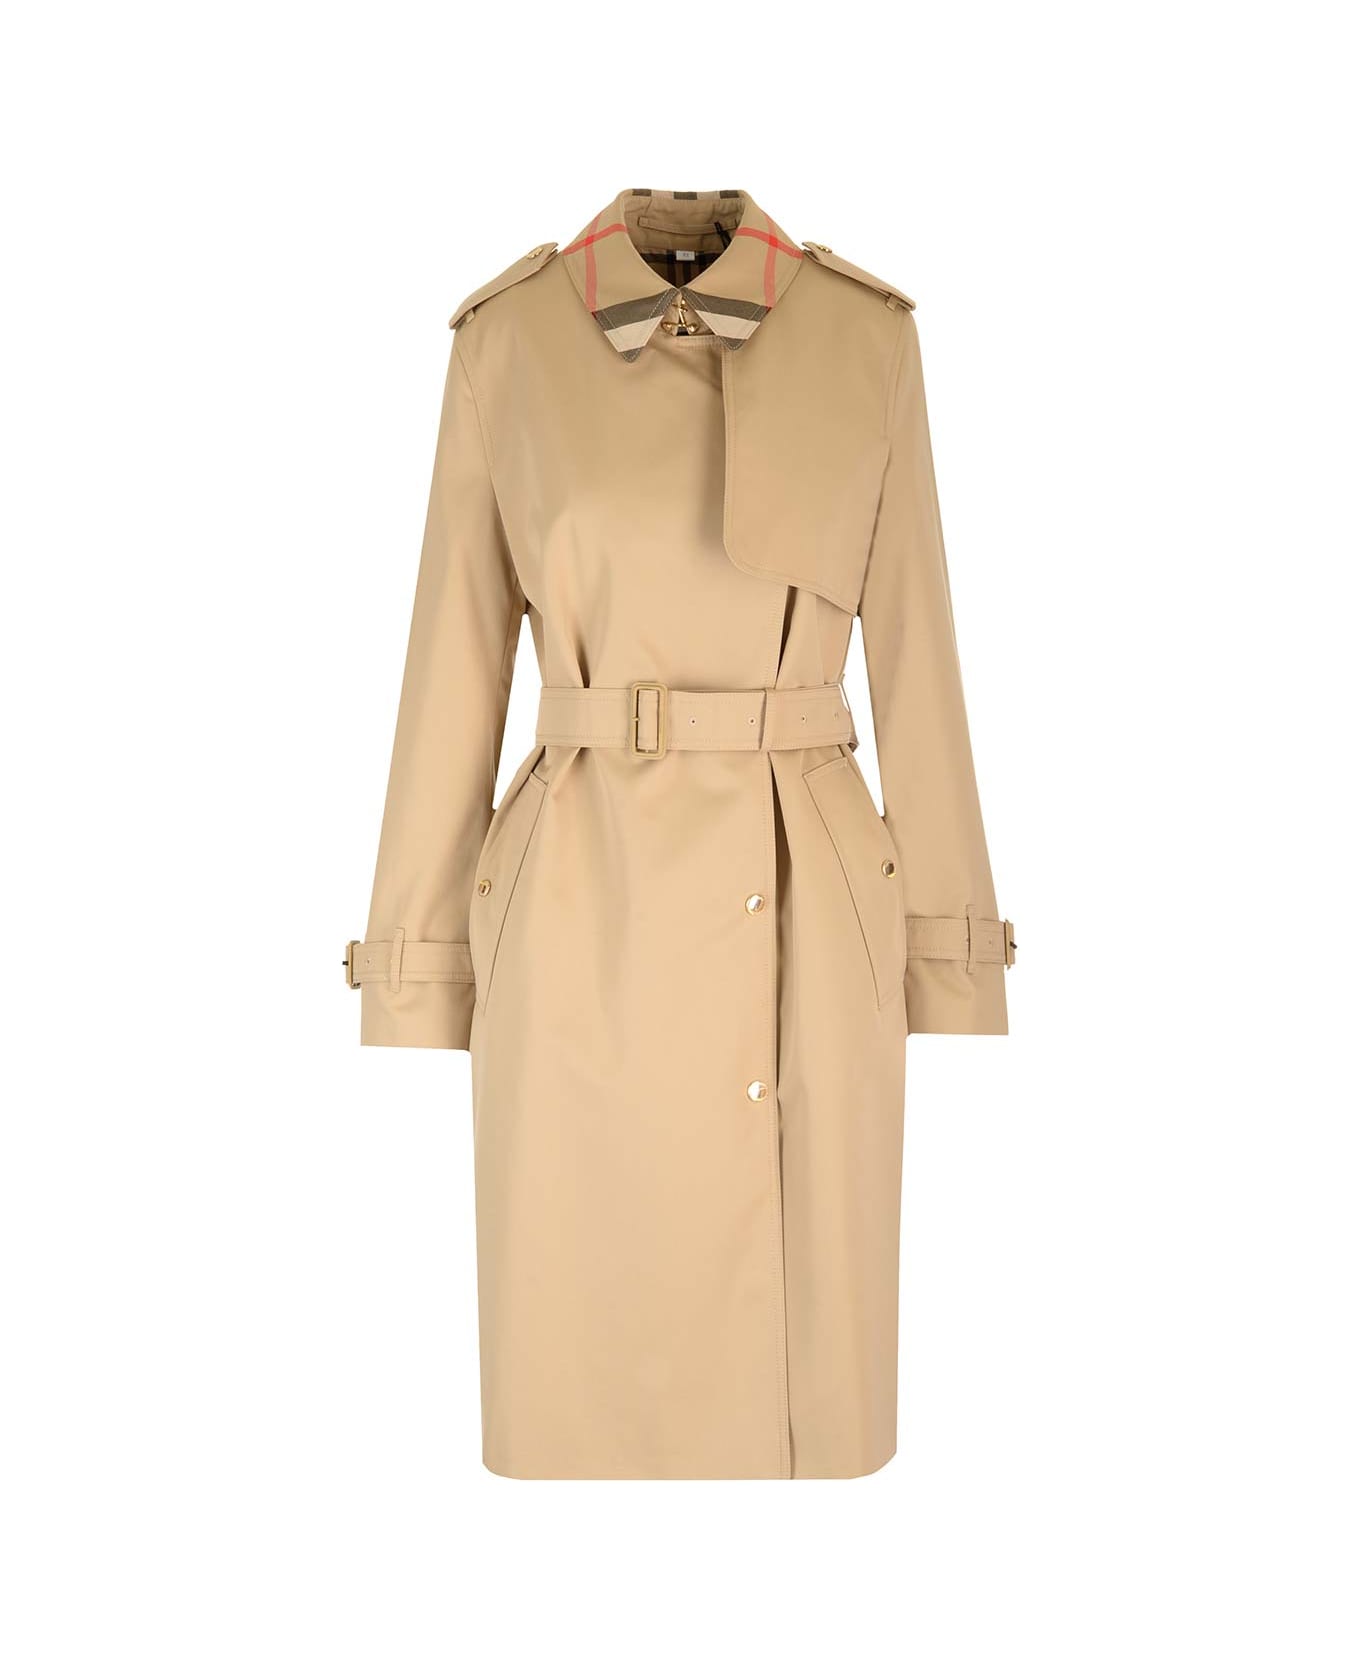 Burberry Honey Trench Coat With Check Collar - Beige コート